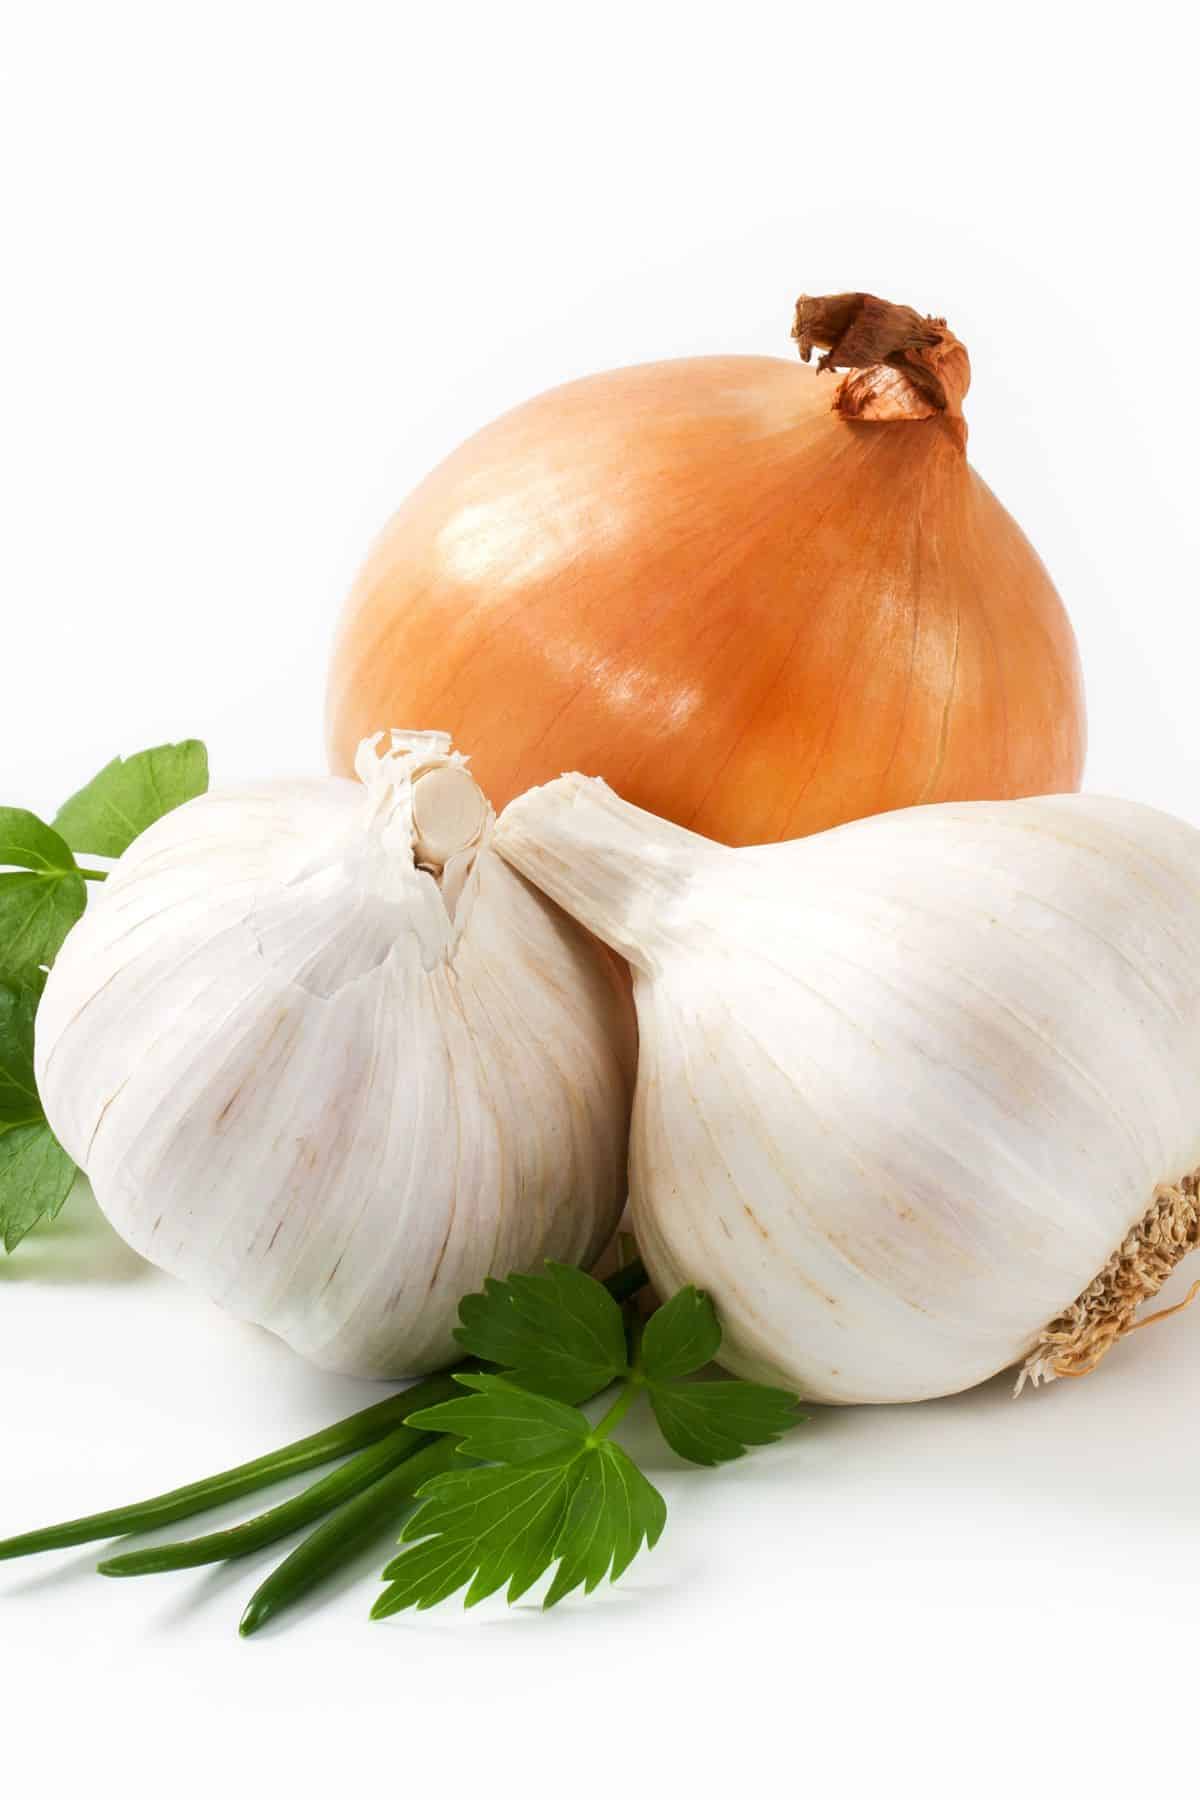 garlic and onion on a white table.